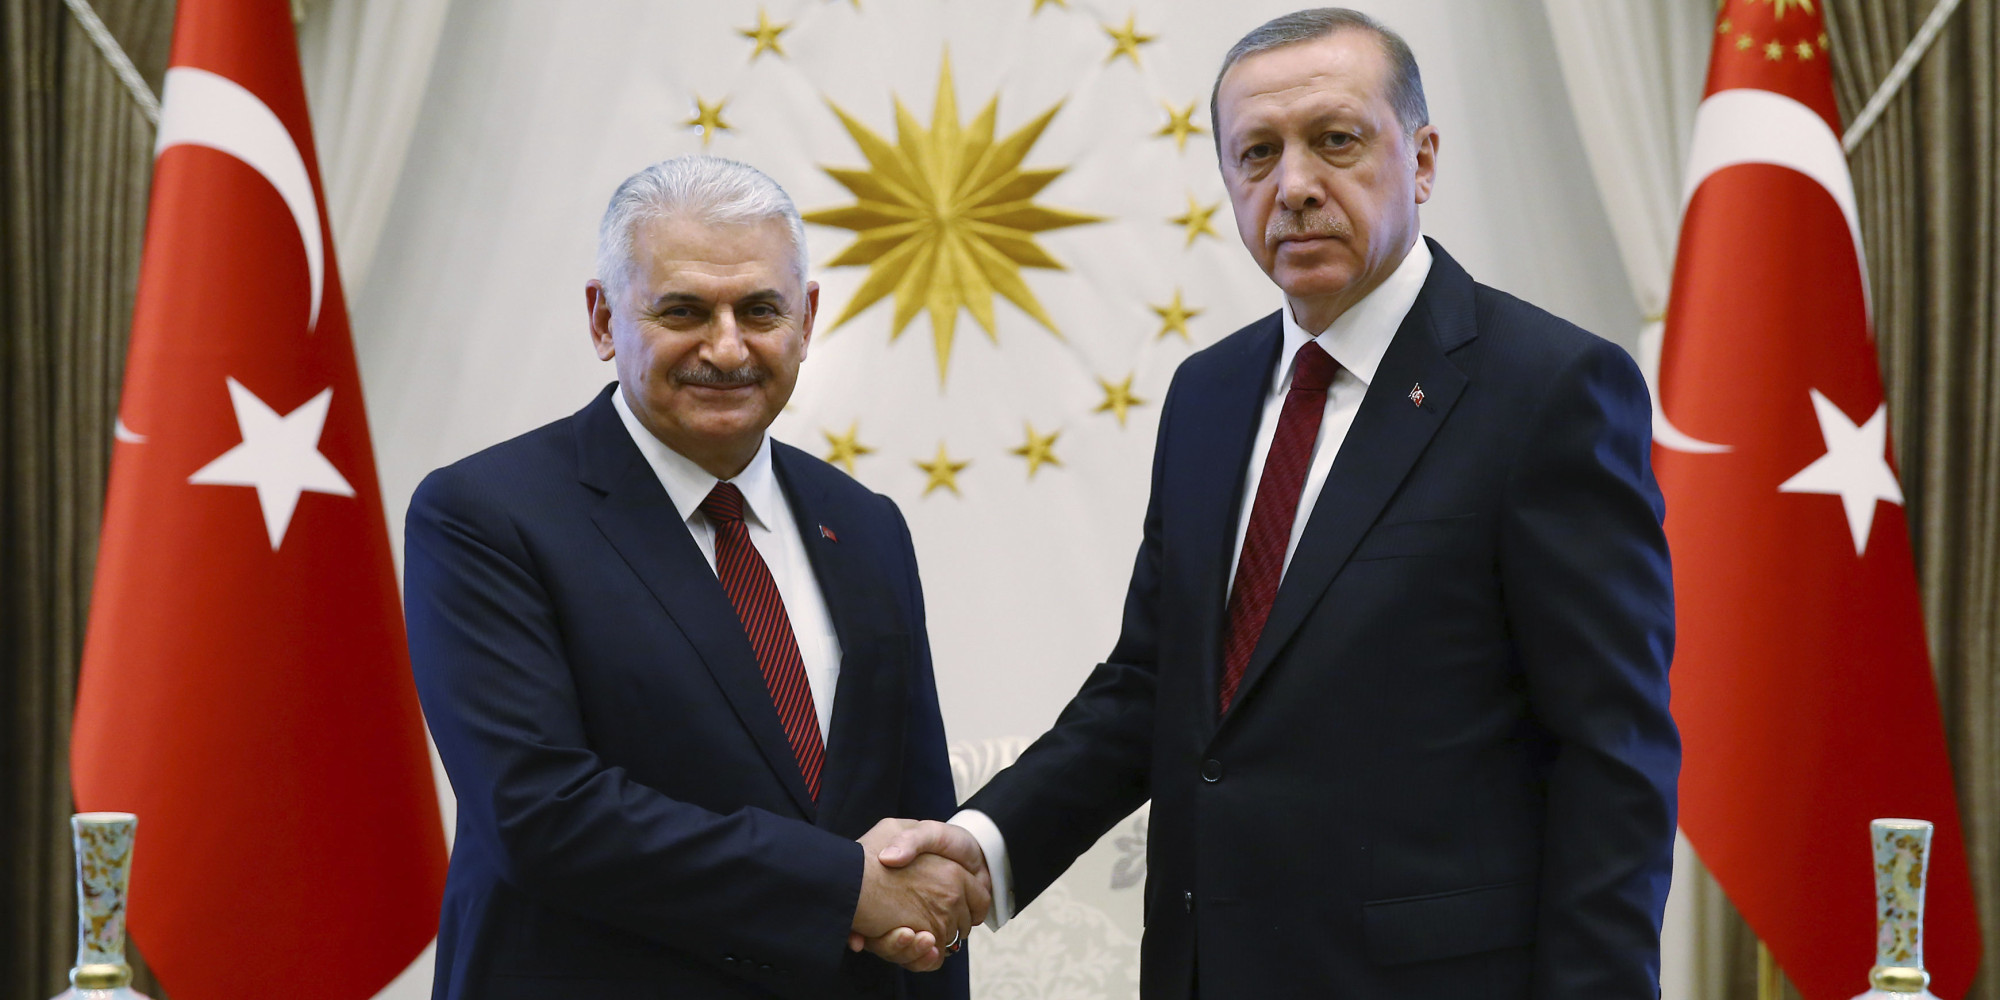 Turkey Is About to Change | HuffPost